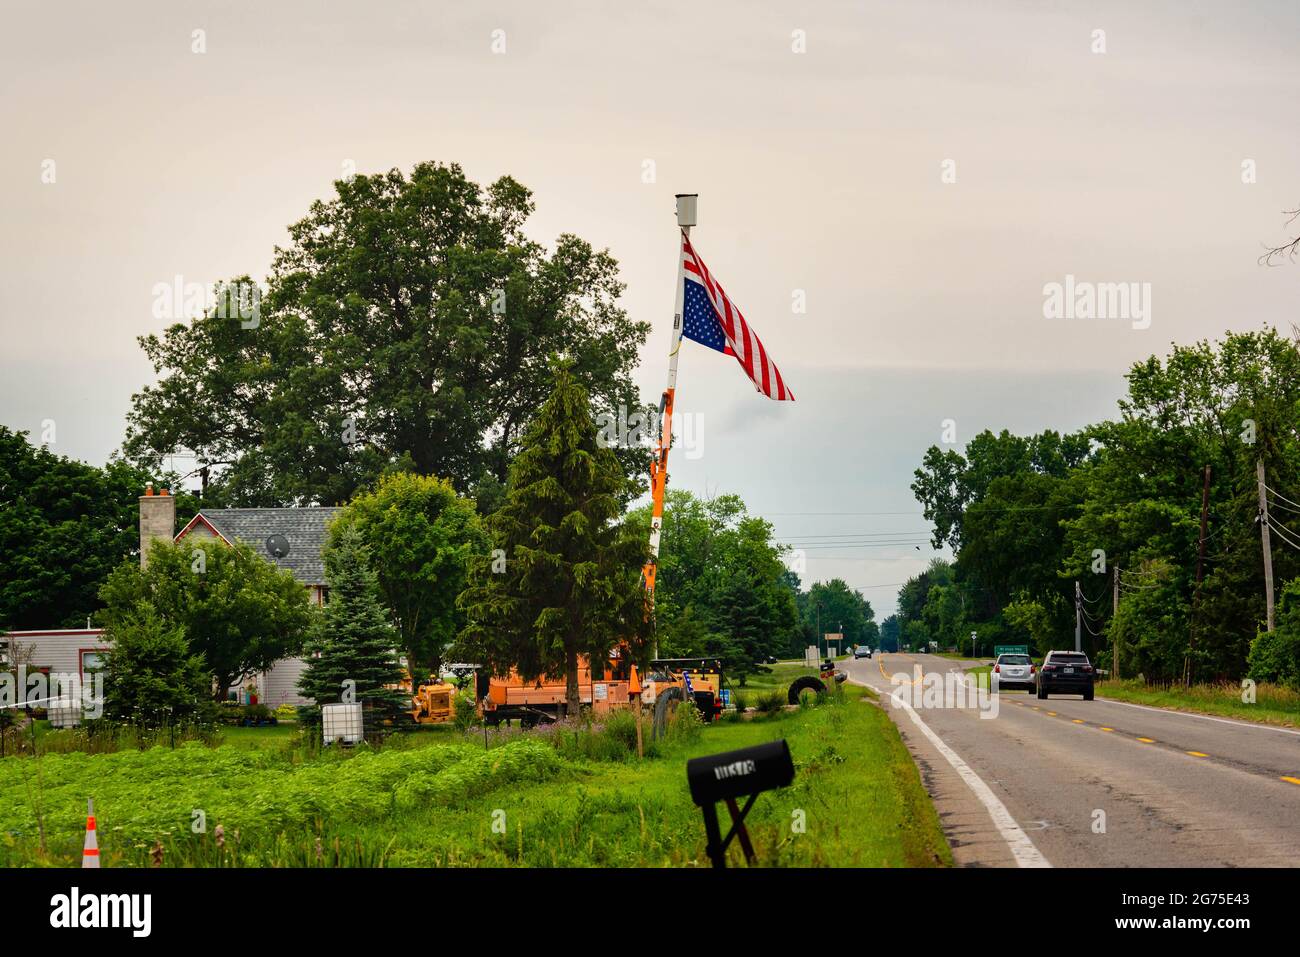 GRAND LEDGE, MI - July 11TH: Flying upside down American flag as a sign of distress in Grand Ledge on July 11th, 2021. Stock Photo